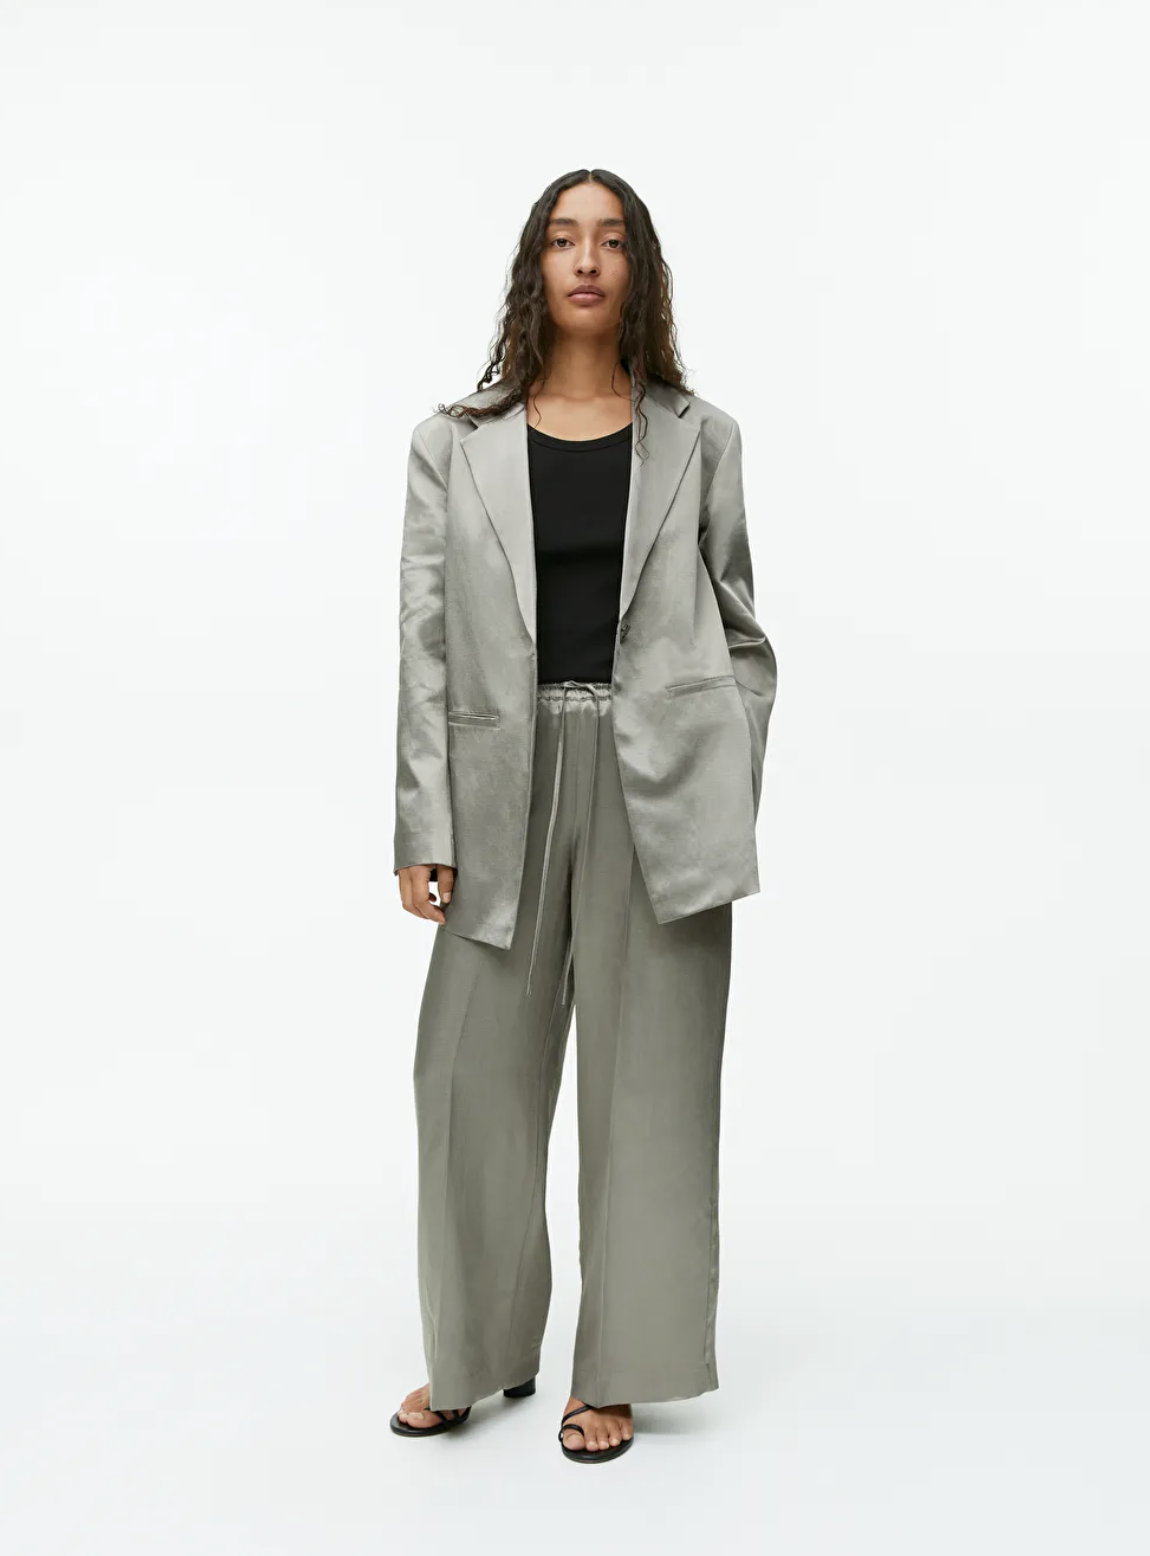 Zara Womens Suits Shop Colorful Blazers  Suiting Sets For Summer   StyleCaster